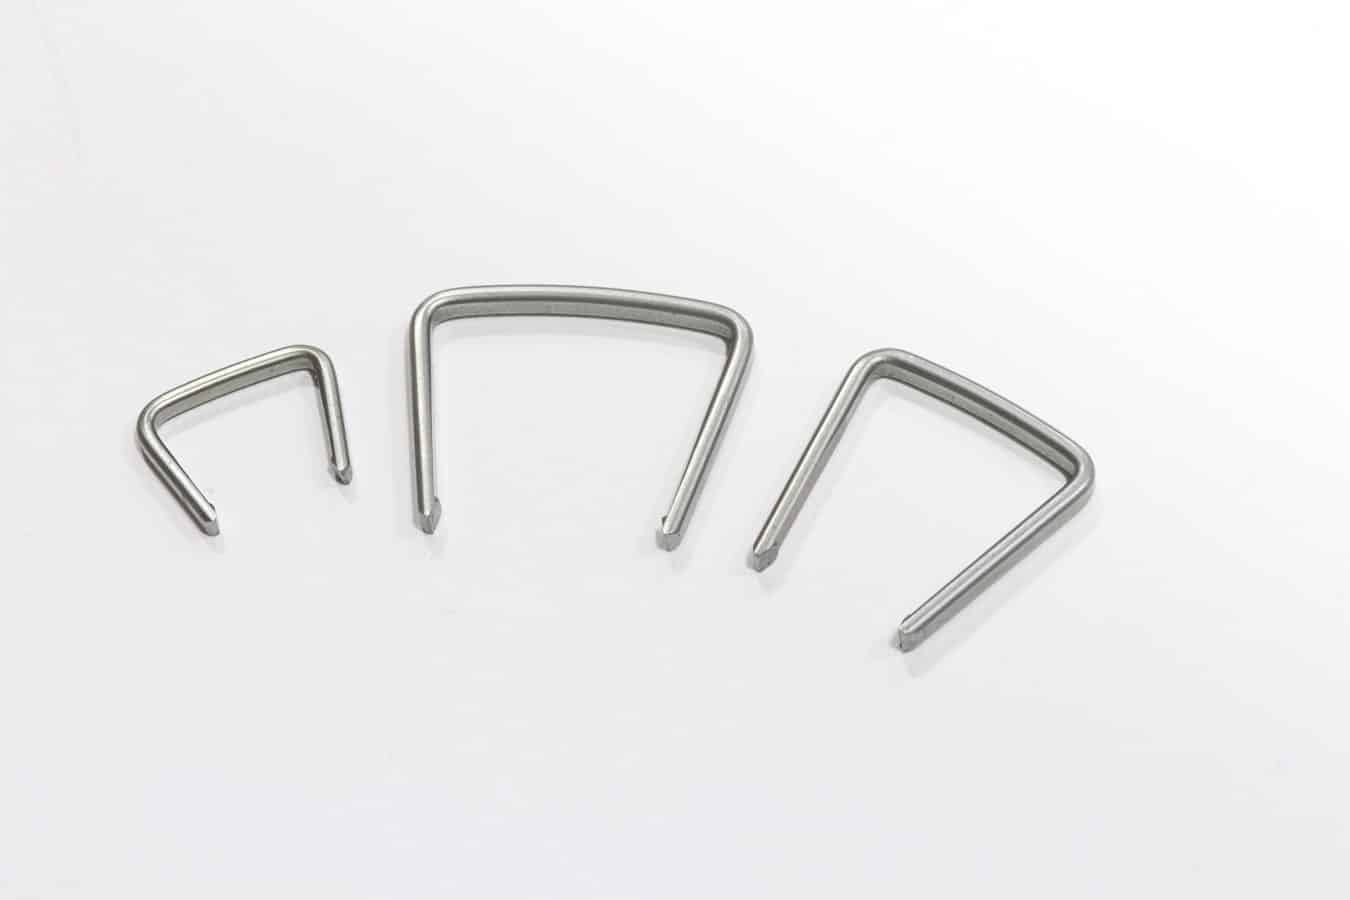 Nitinol Staples | Medical Component Specialists